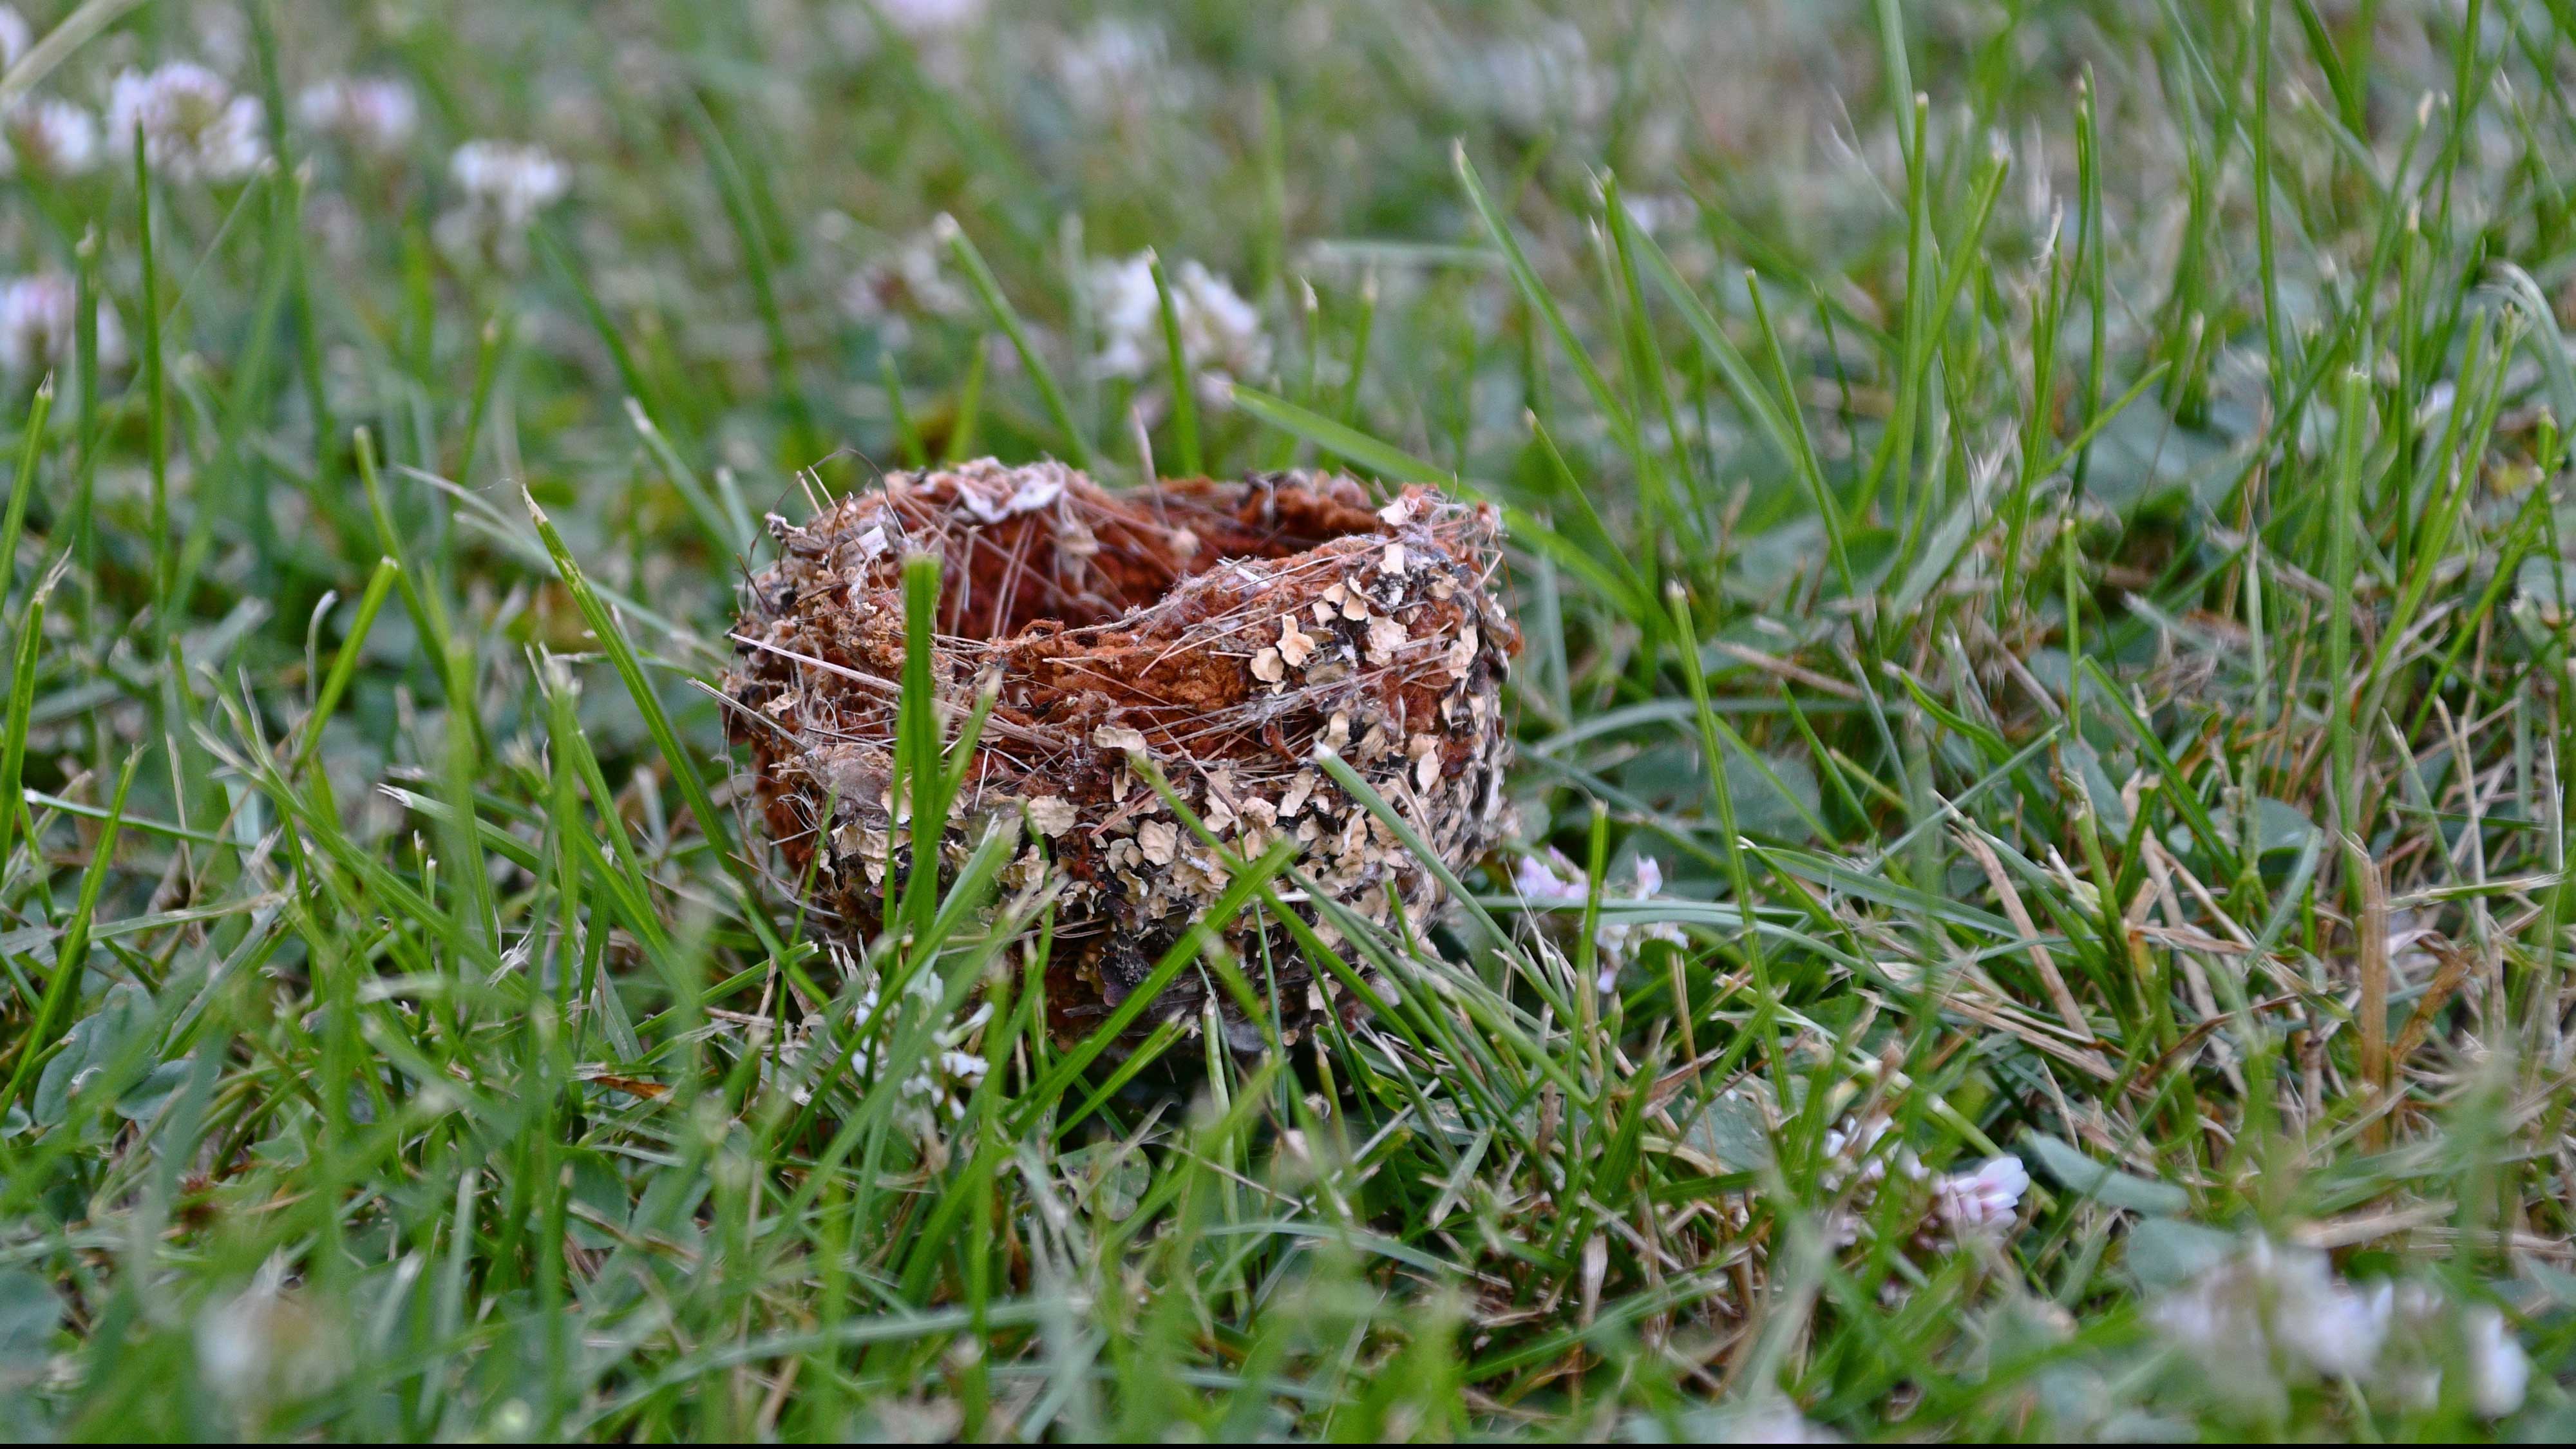 A cup nest on the ground.